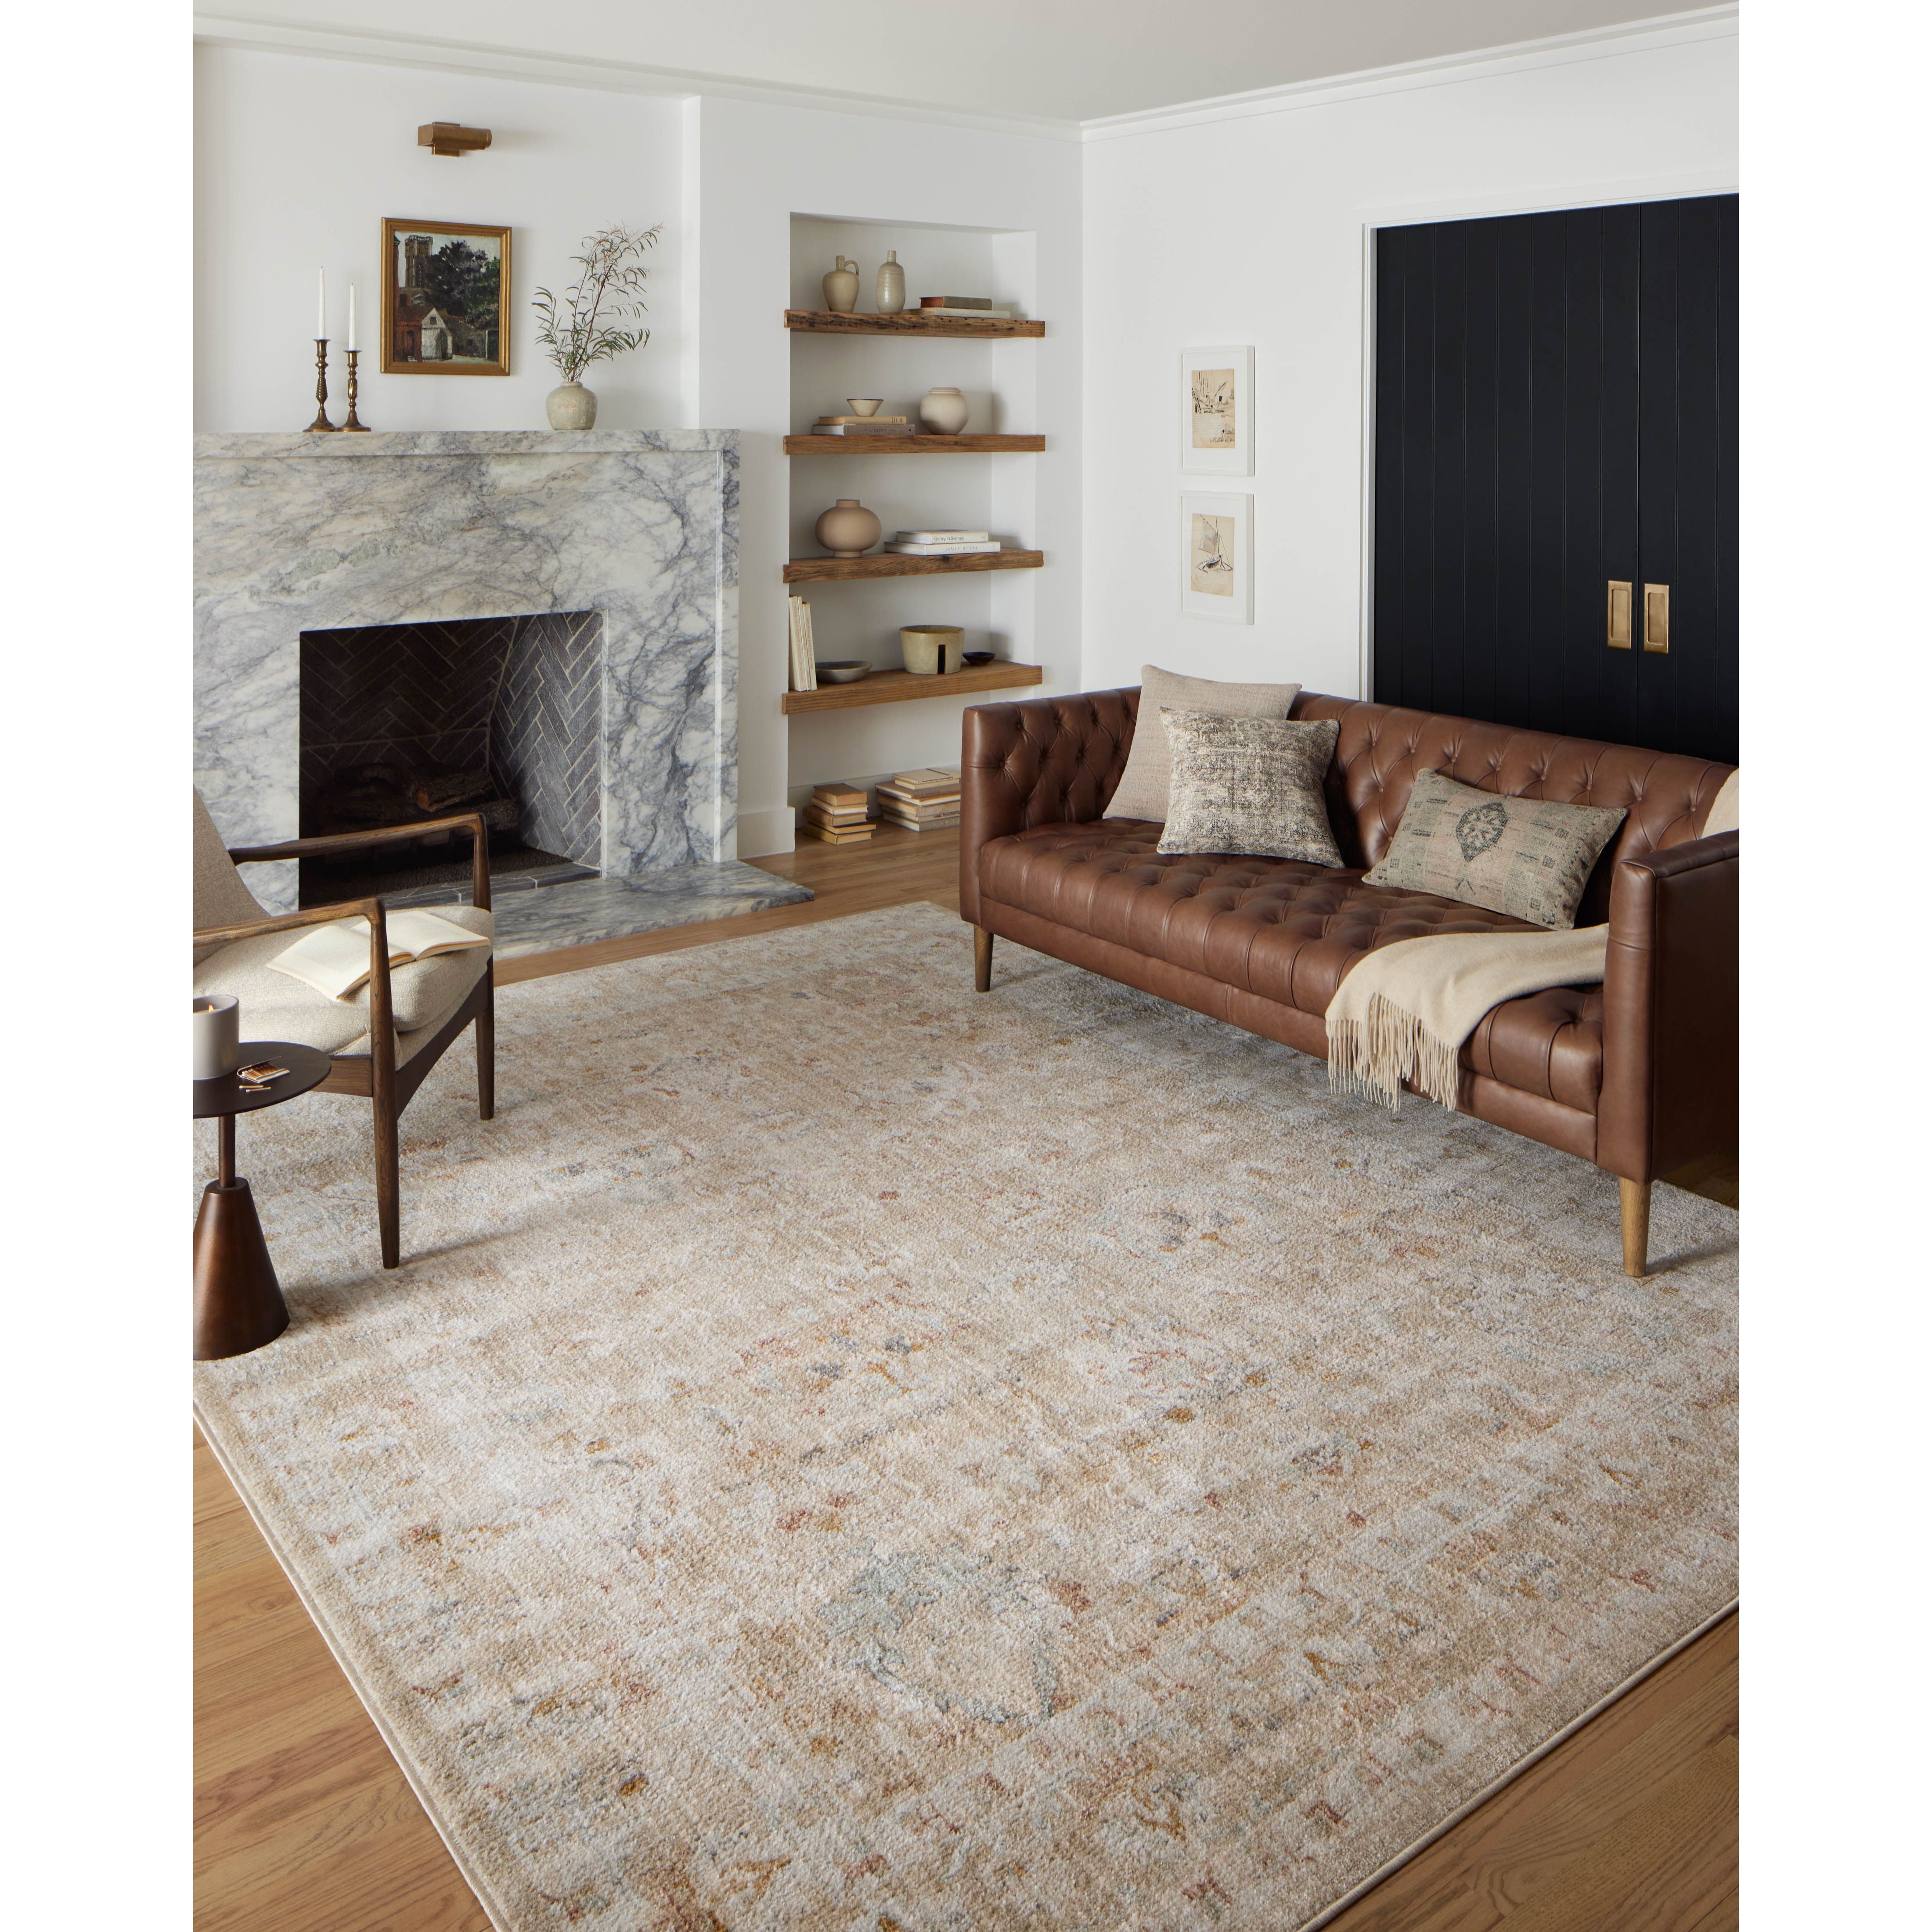 Inspired by antique Turkish Oushak carpets with large-scale motifs, the Monroe Sand / Sunrise Rug modernizes the traditional design in neutral palettes, many of which have black details that anchor the rug in the room. Monroe is power-loomed of 100% polypropylene for easy care and reliable durability. Amethyst Home provides interior design, new home construction design consulting, vintage area rugs, and lighting in the Alpharetta metro area.